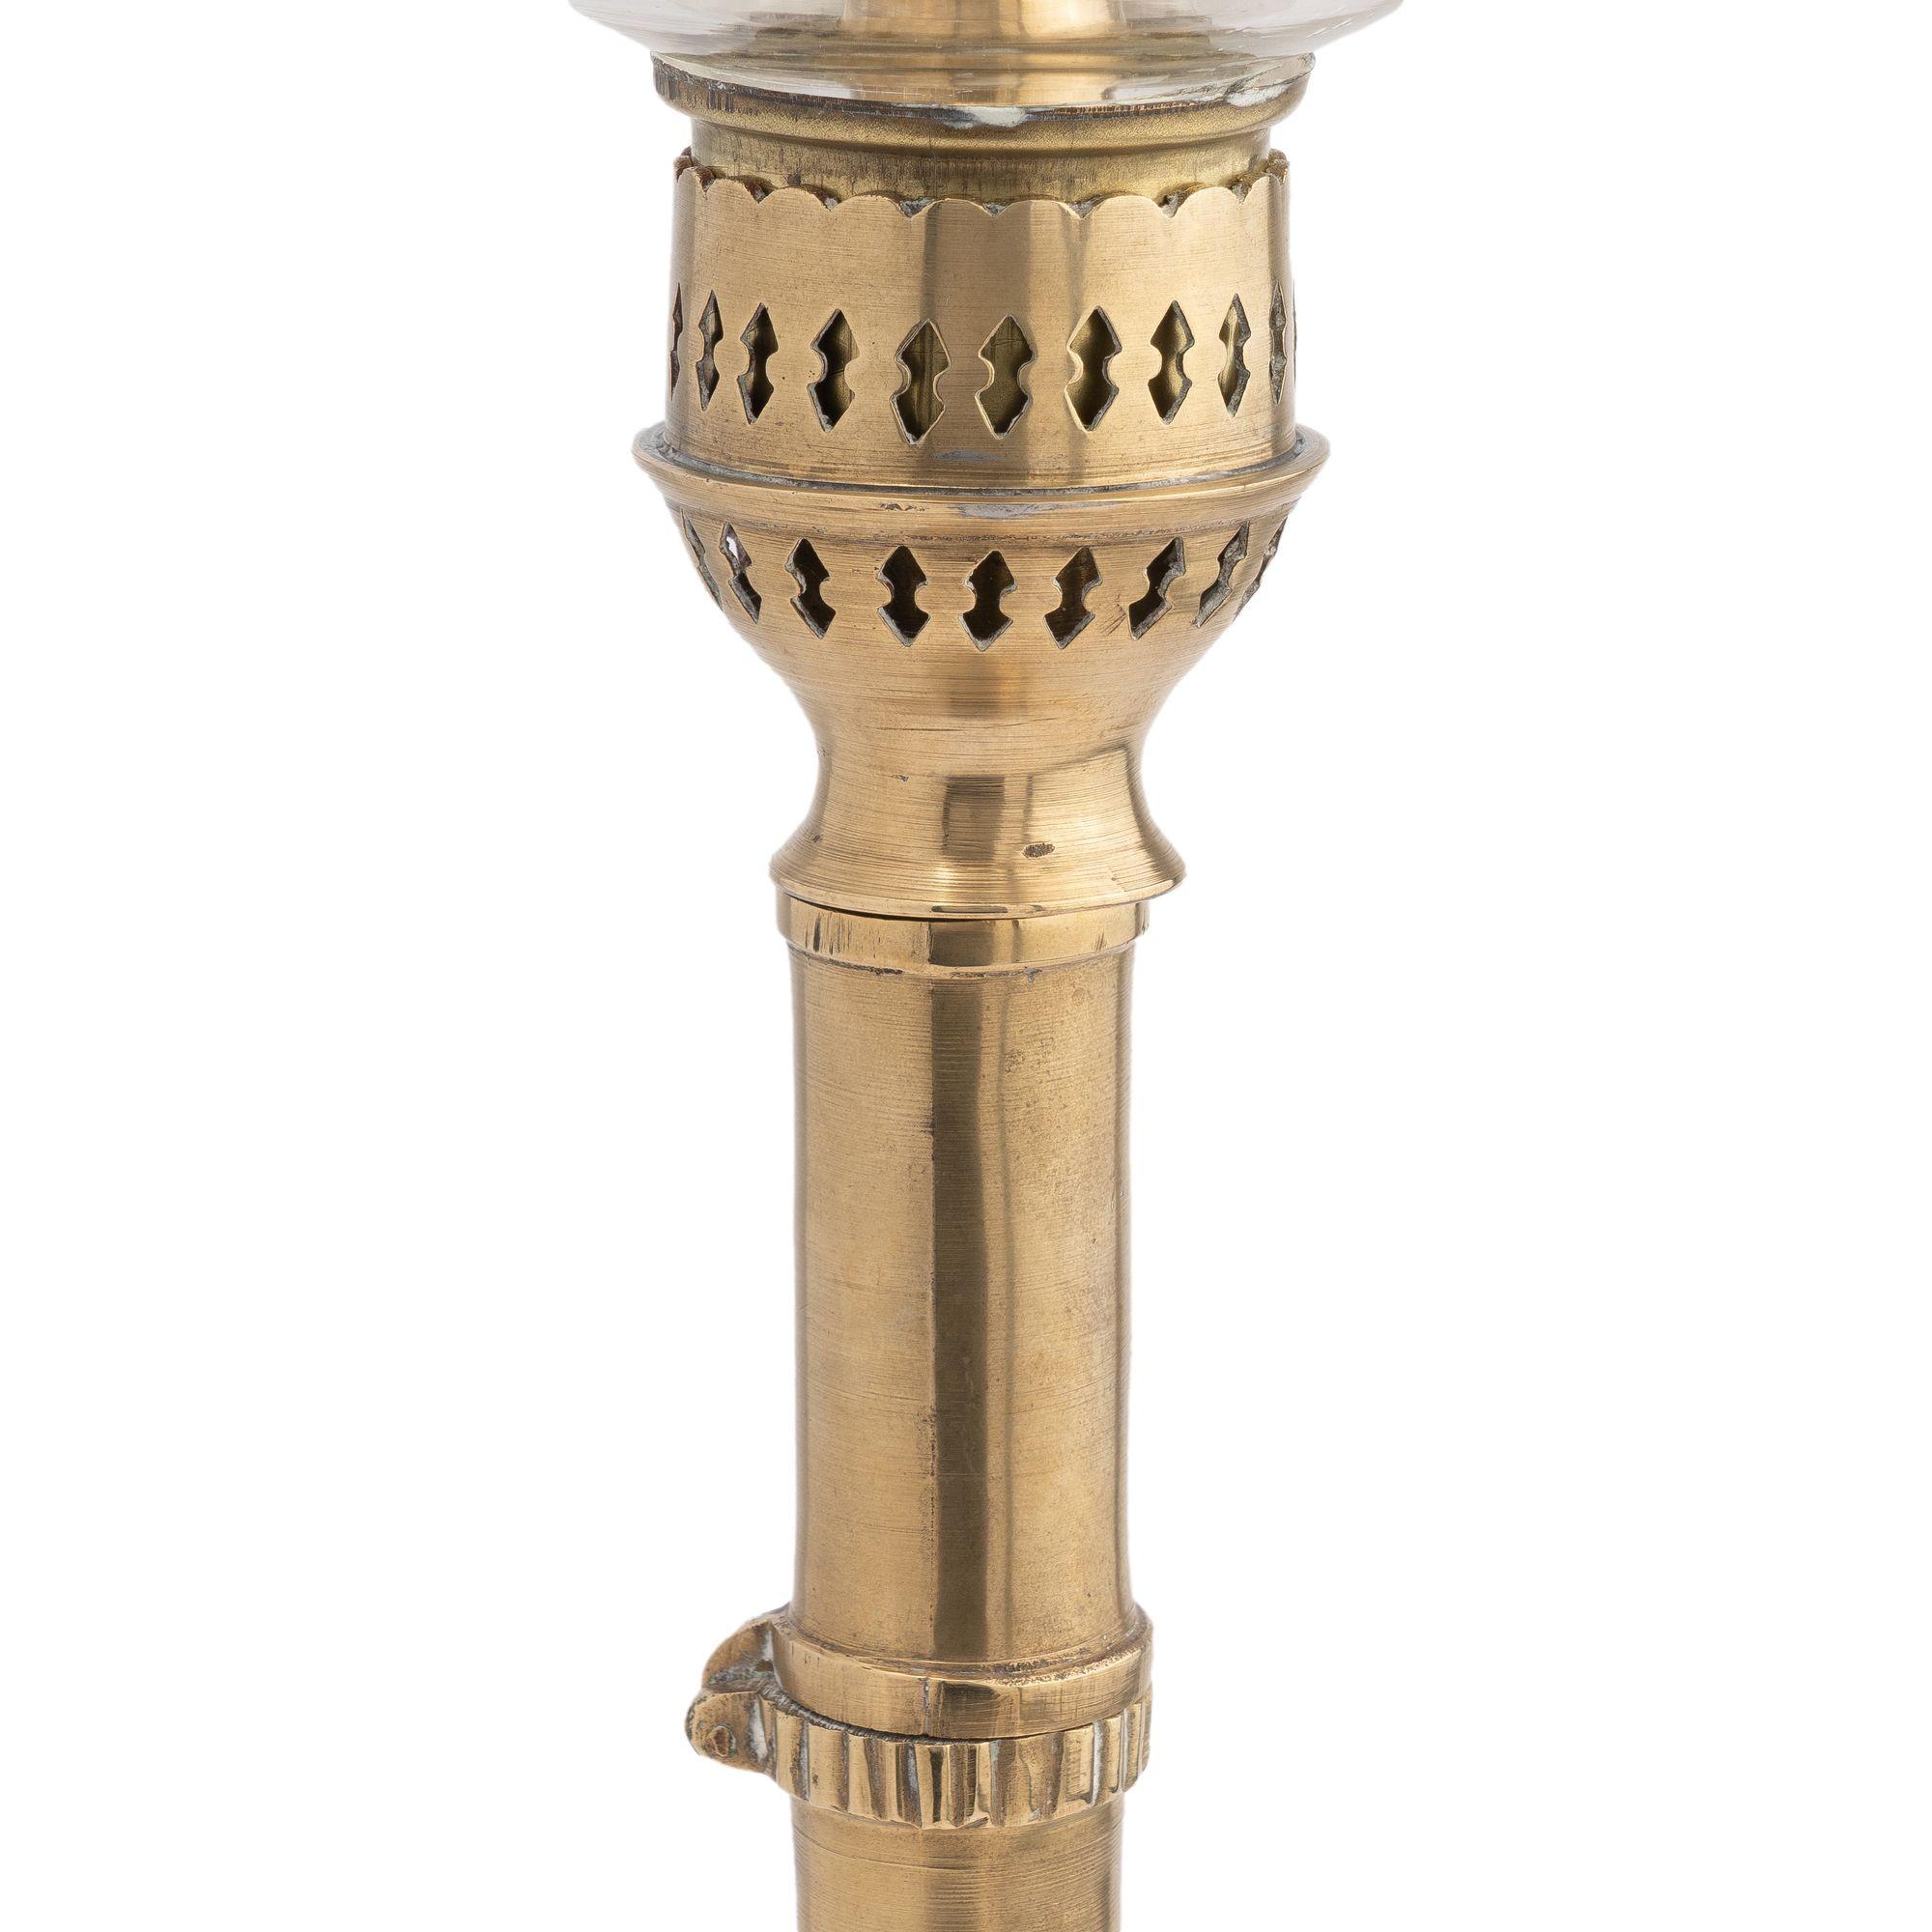 German Silver Convertible Hurricane Lamp with Glass Shade, 1830-50 1